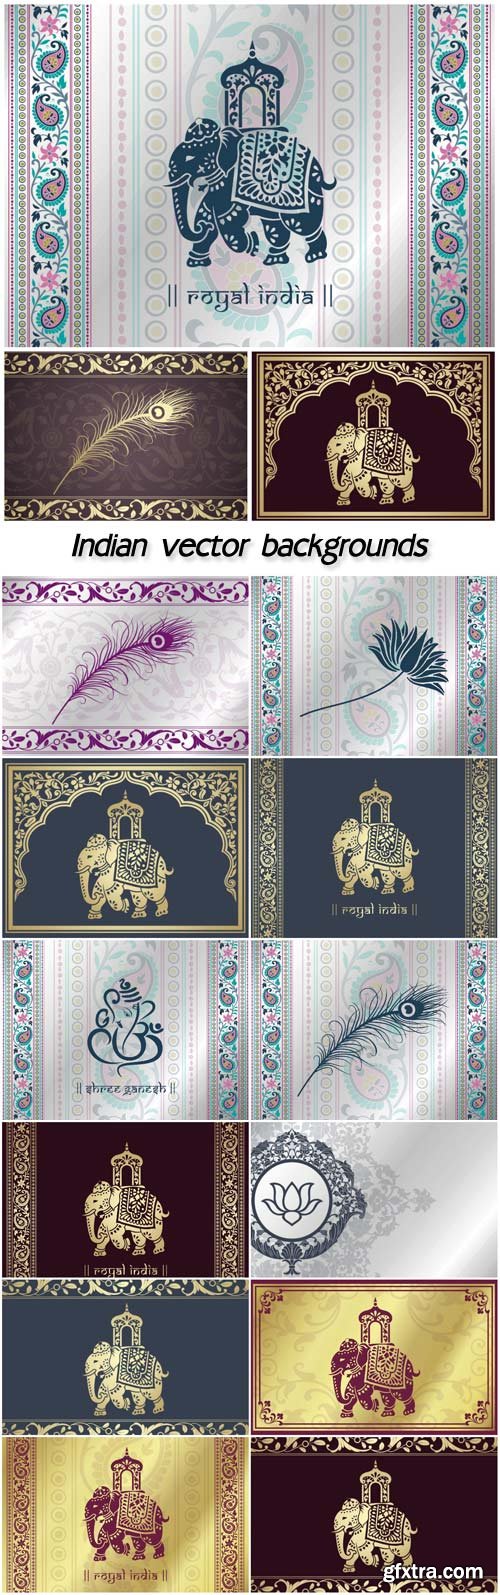 Indian vector backgrounds with patterns and elephants